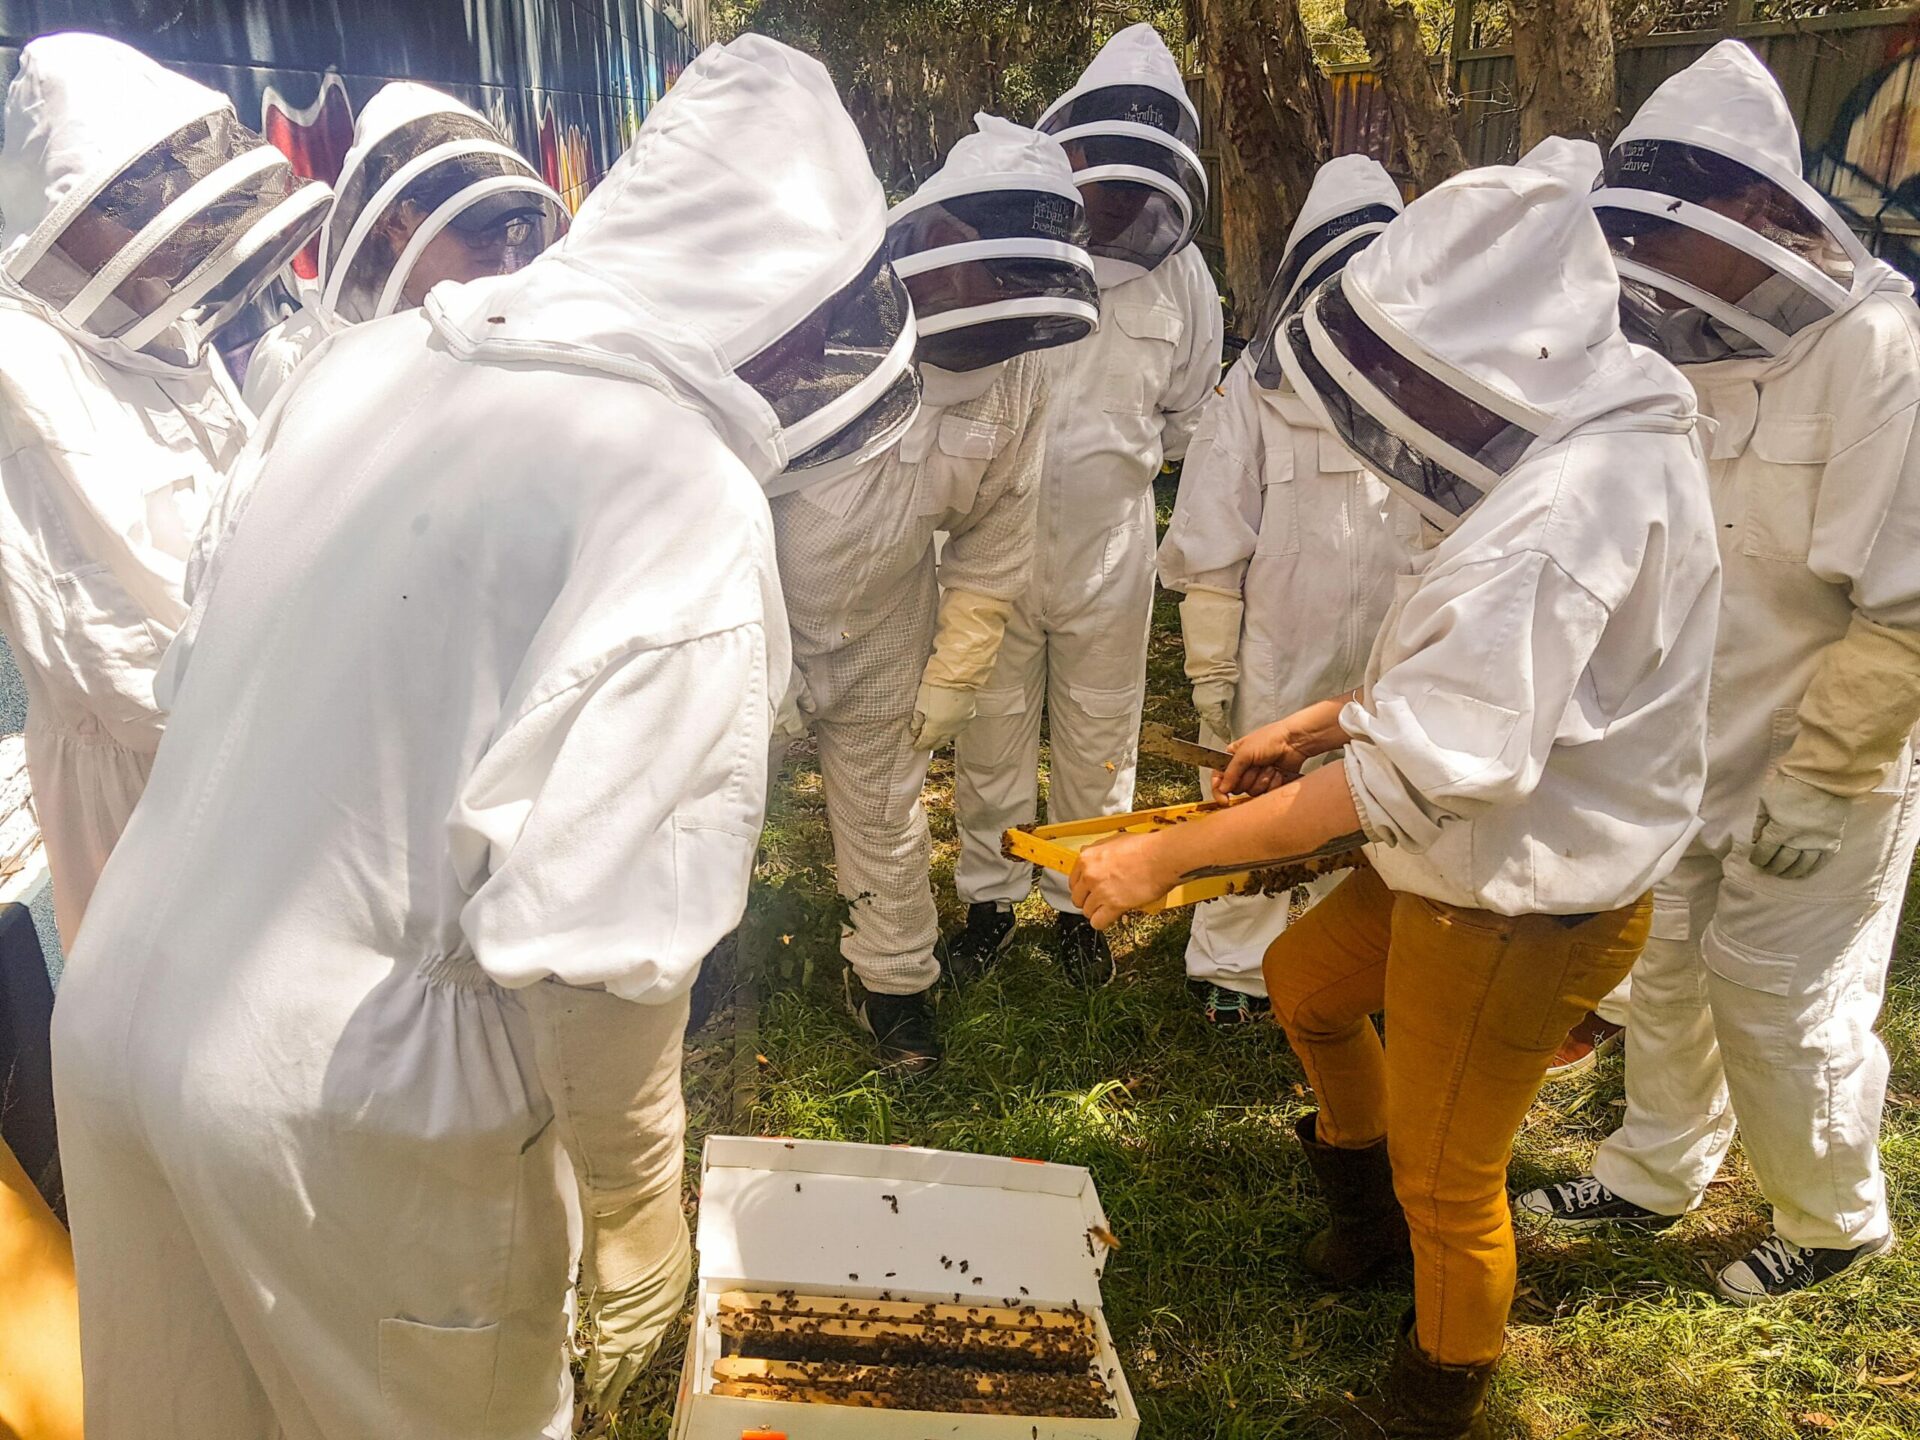 Group of students gathered around a hive during beekeeping course in Sydney